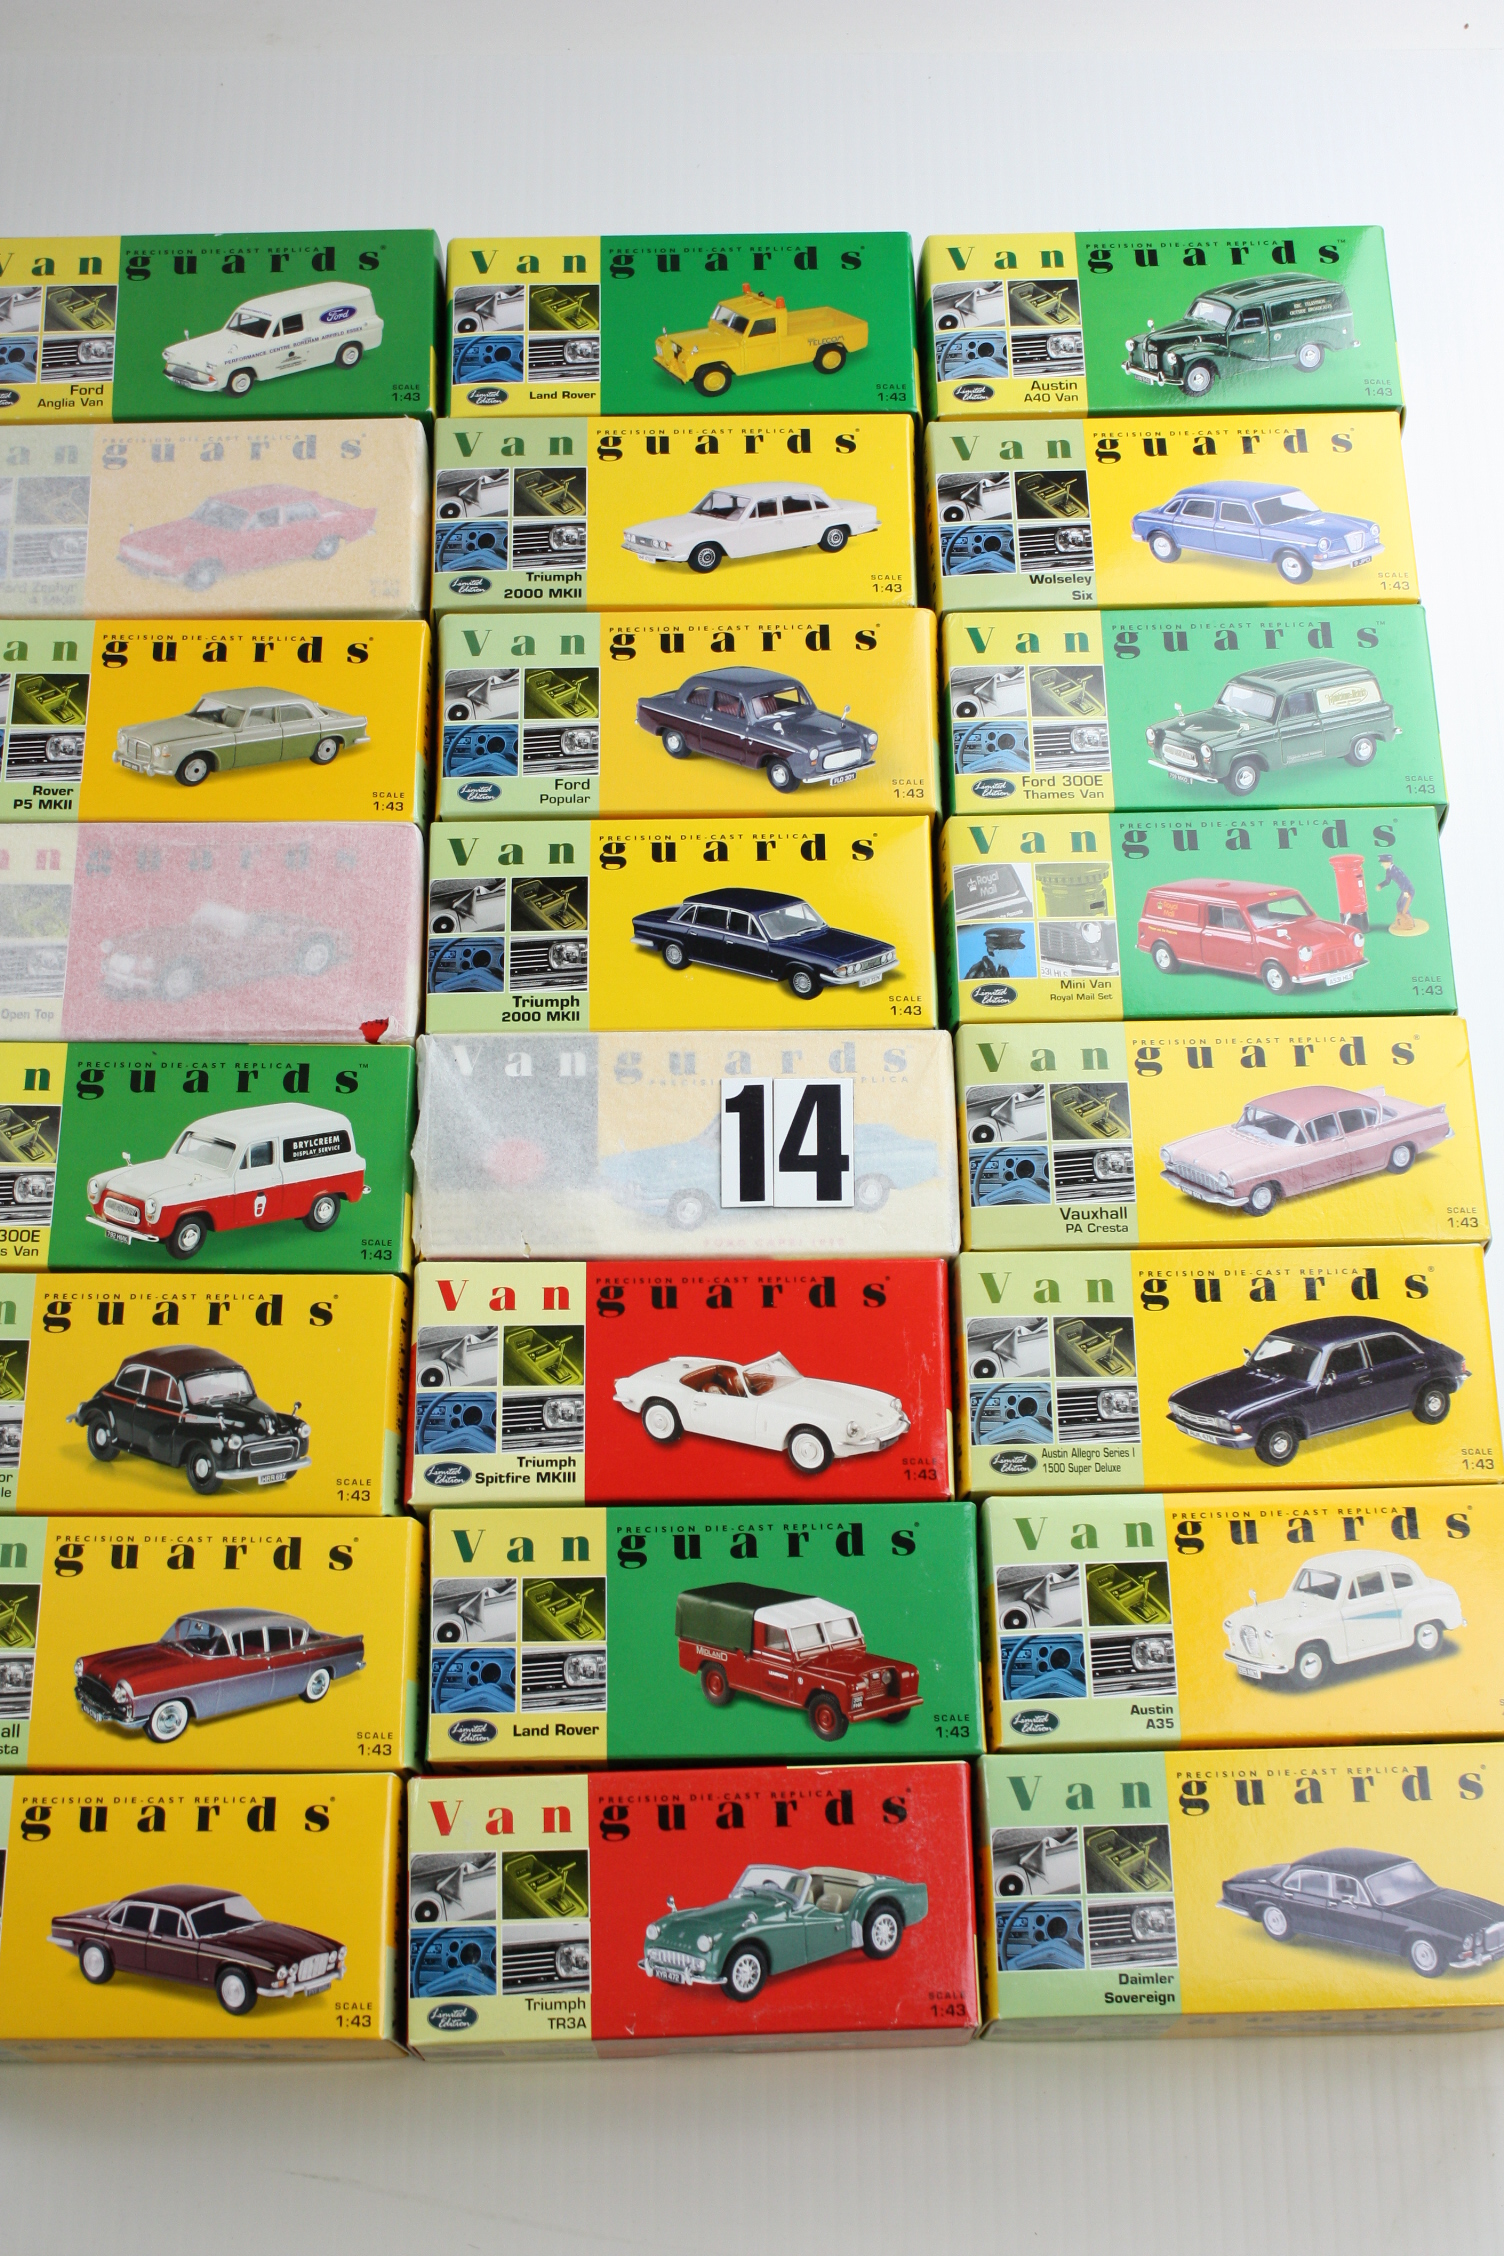 Vanguards Boxed 1:43 scale Vehicles: various models, including Vauxhall PA Cresta, Triumph